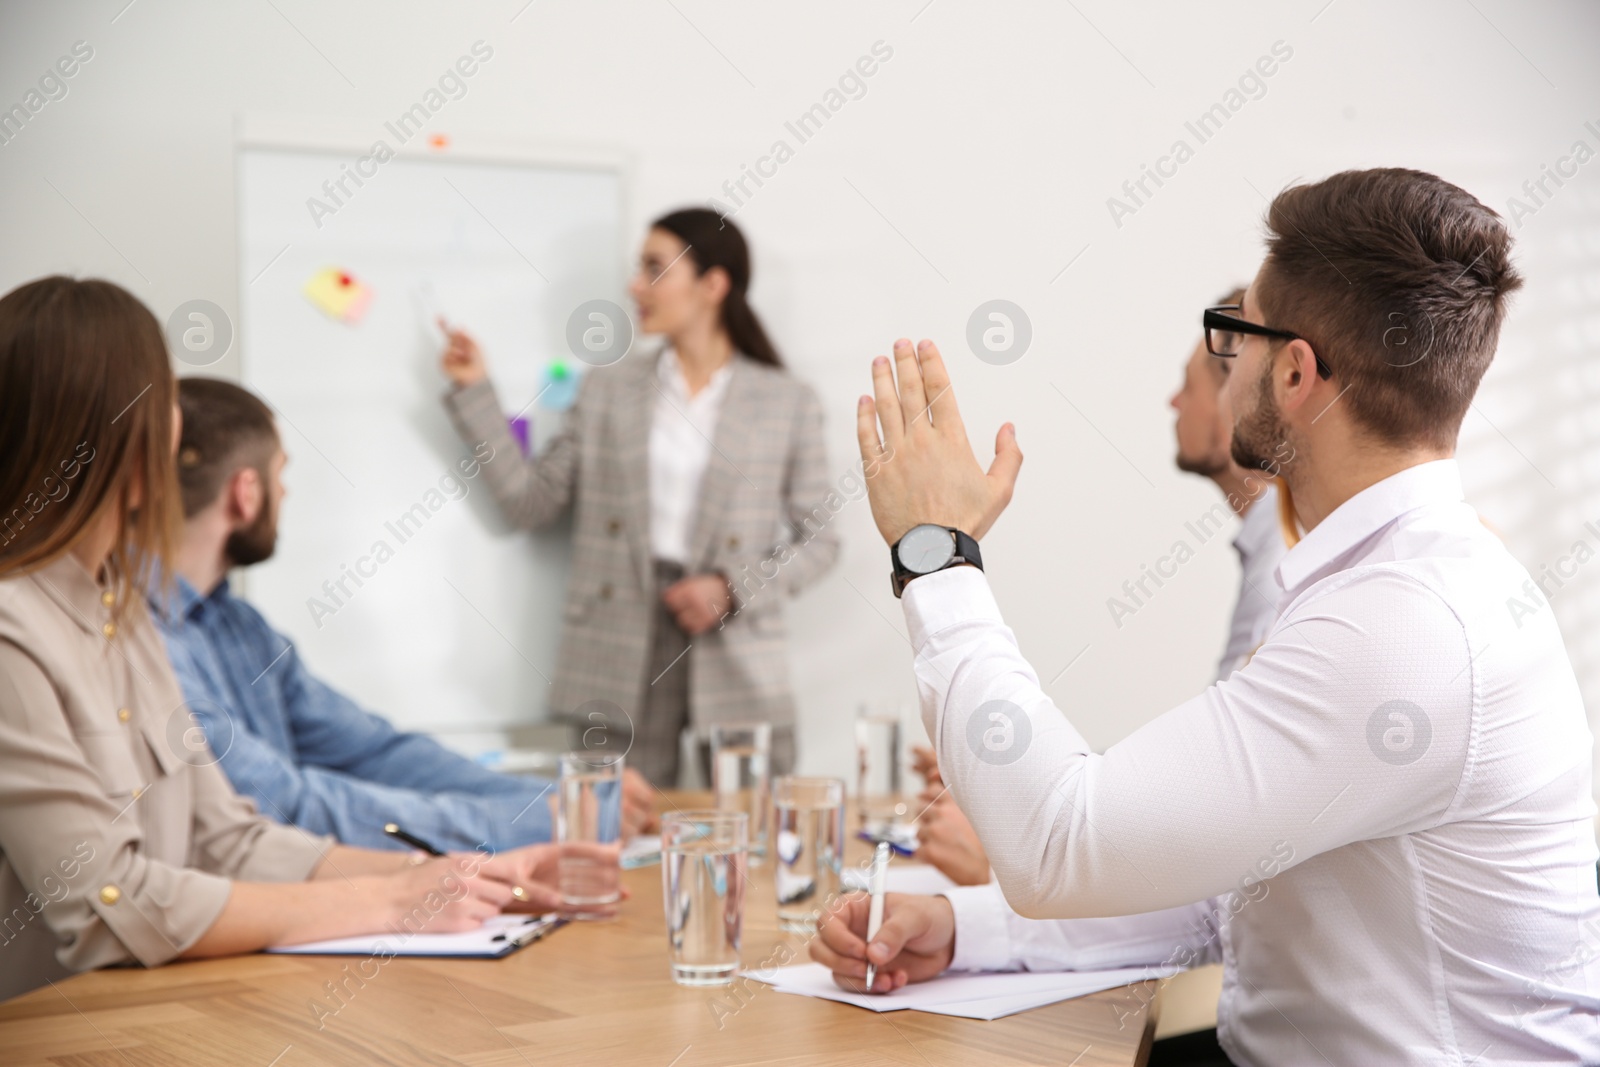 Photo of Young man raising hand to ask question at business training in conference room